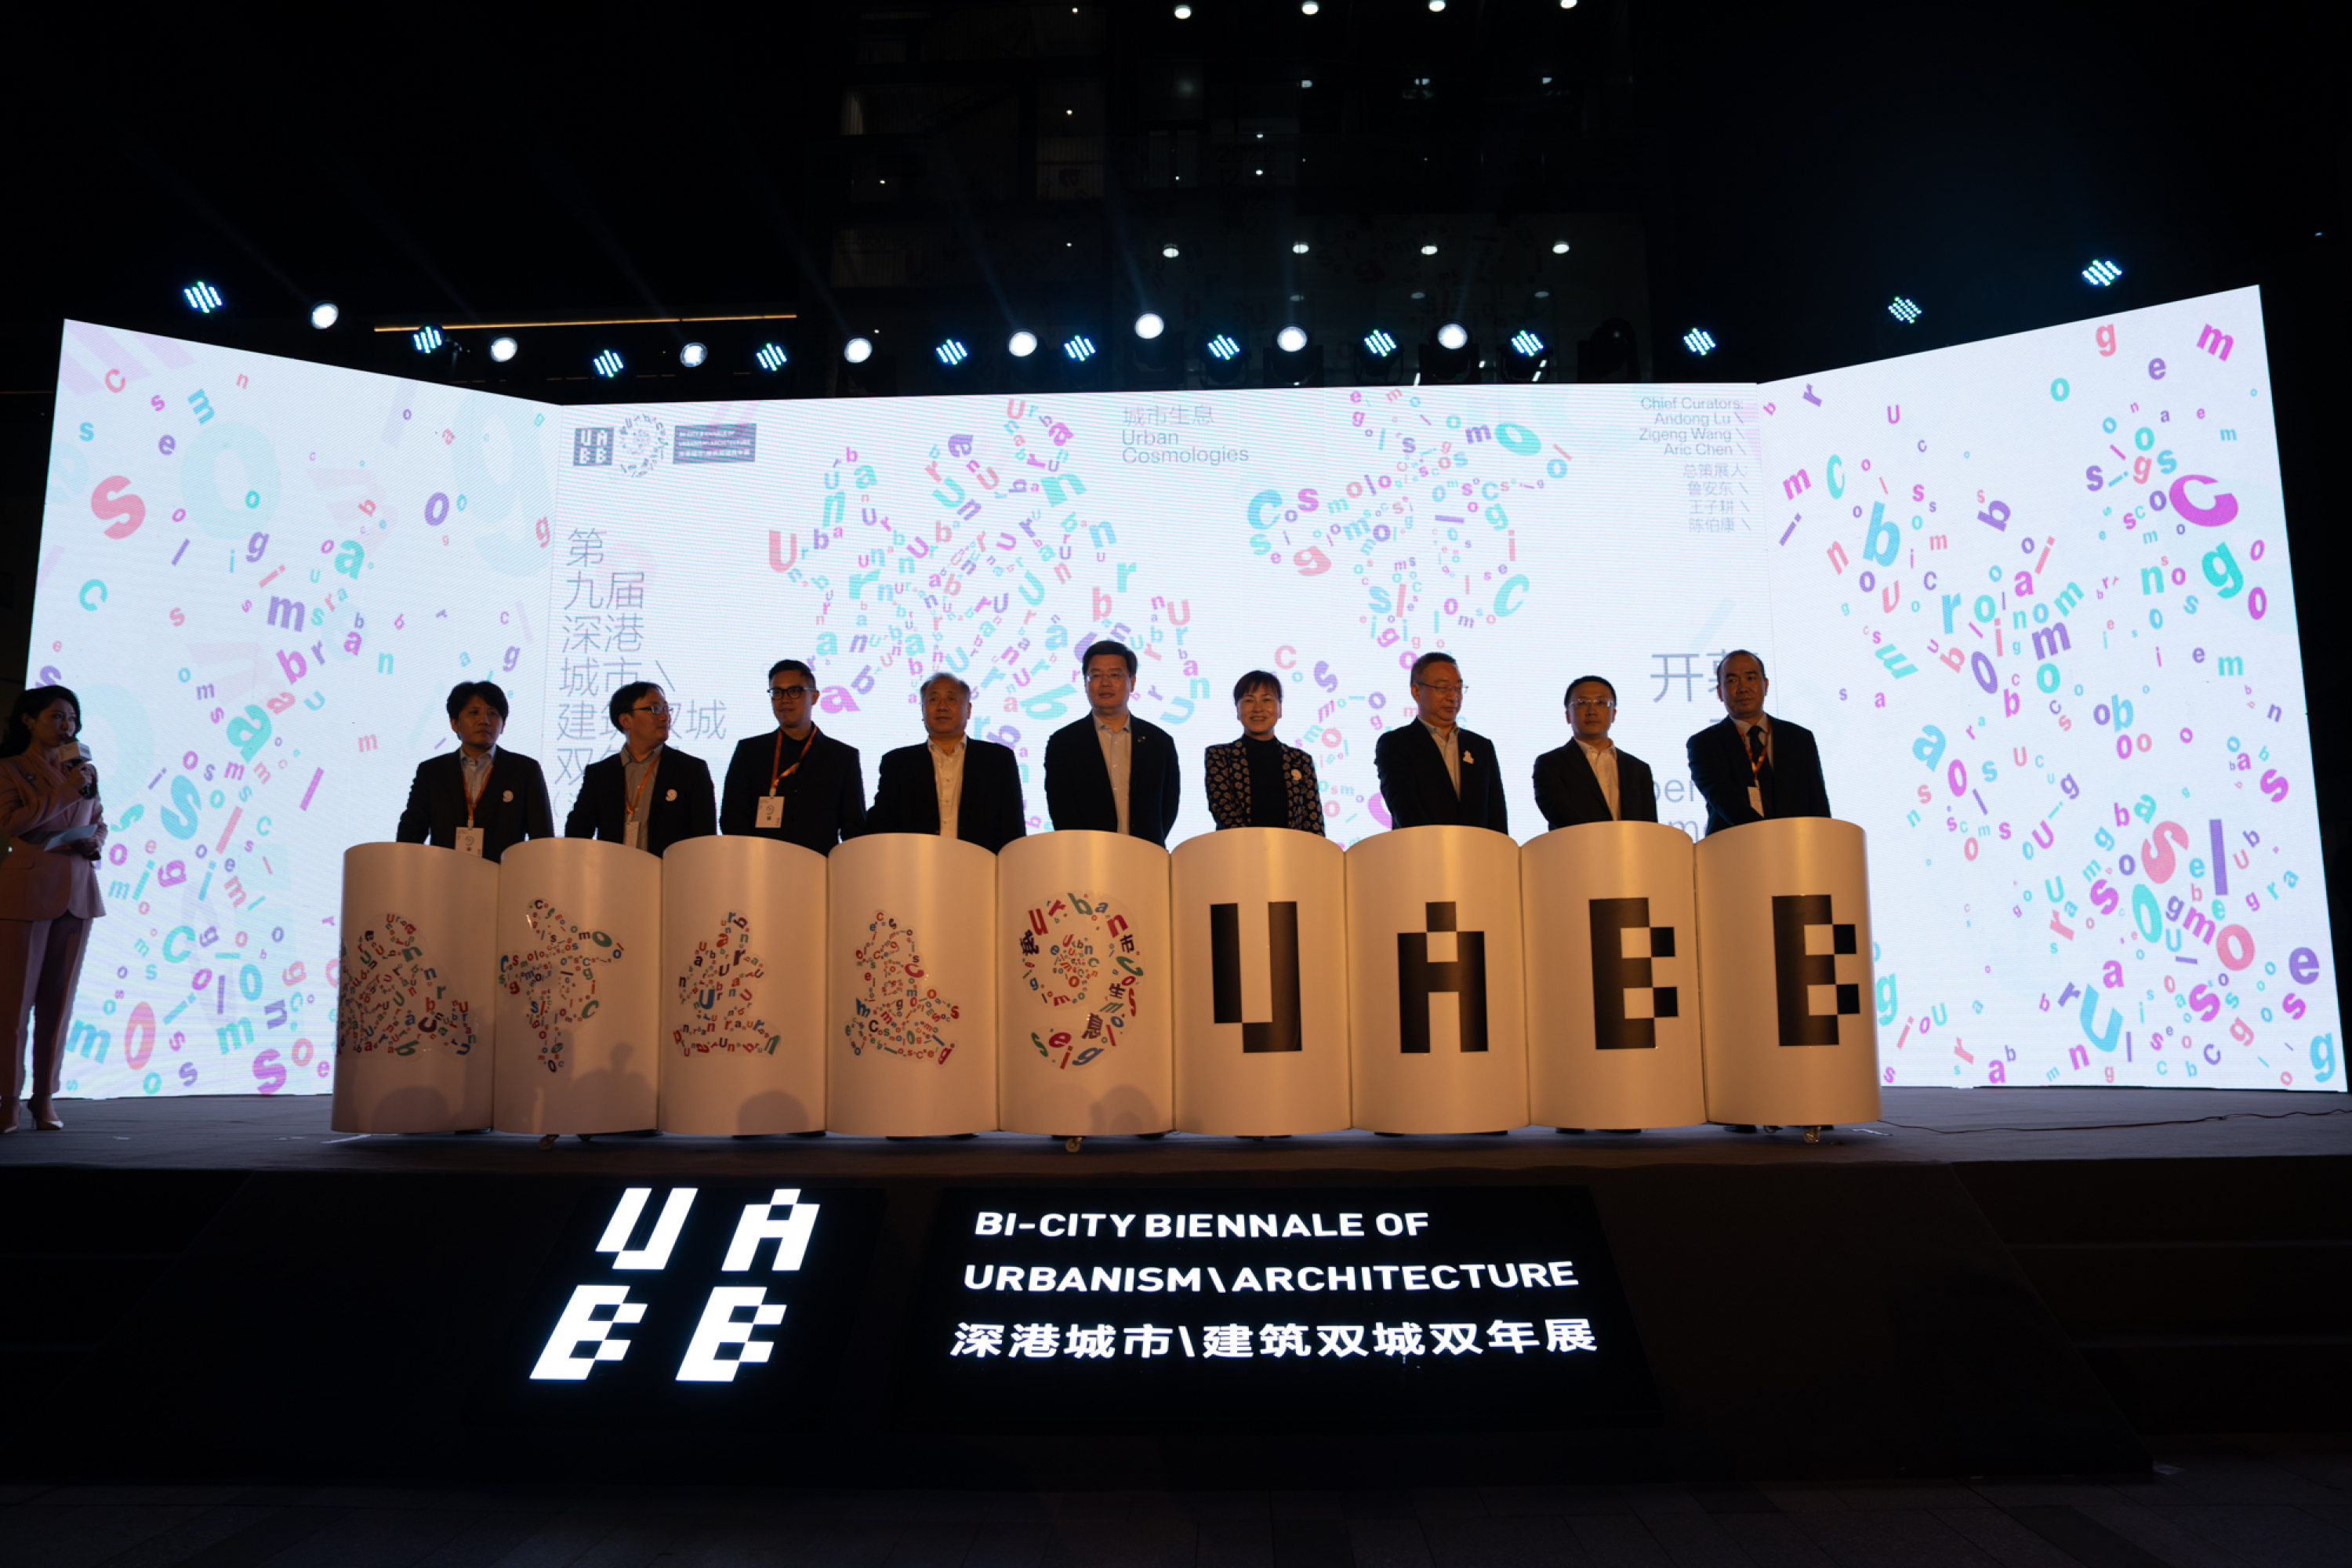 The 9th Bi-City Biennale of Urbanism/Architecture (Shenzhen) Opened, with the Participation of Hong Kong Chief Executive Mr. Jiachao Li and Shenzhen Mayor Mr. Weizhong Qin at the Launch Ceremony